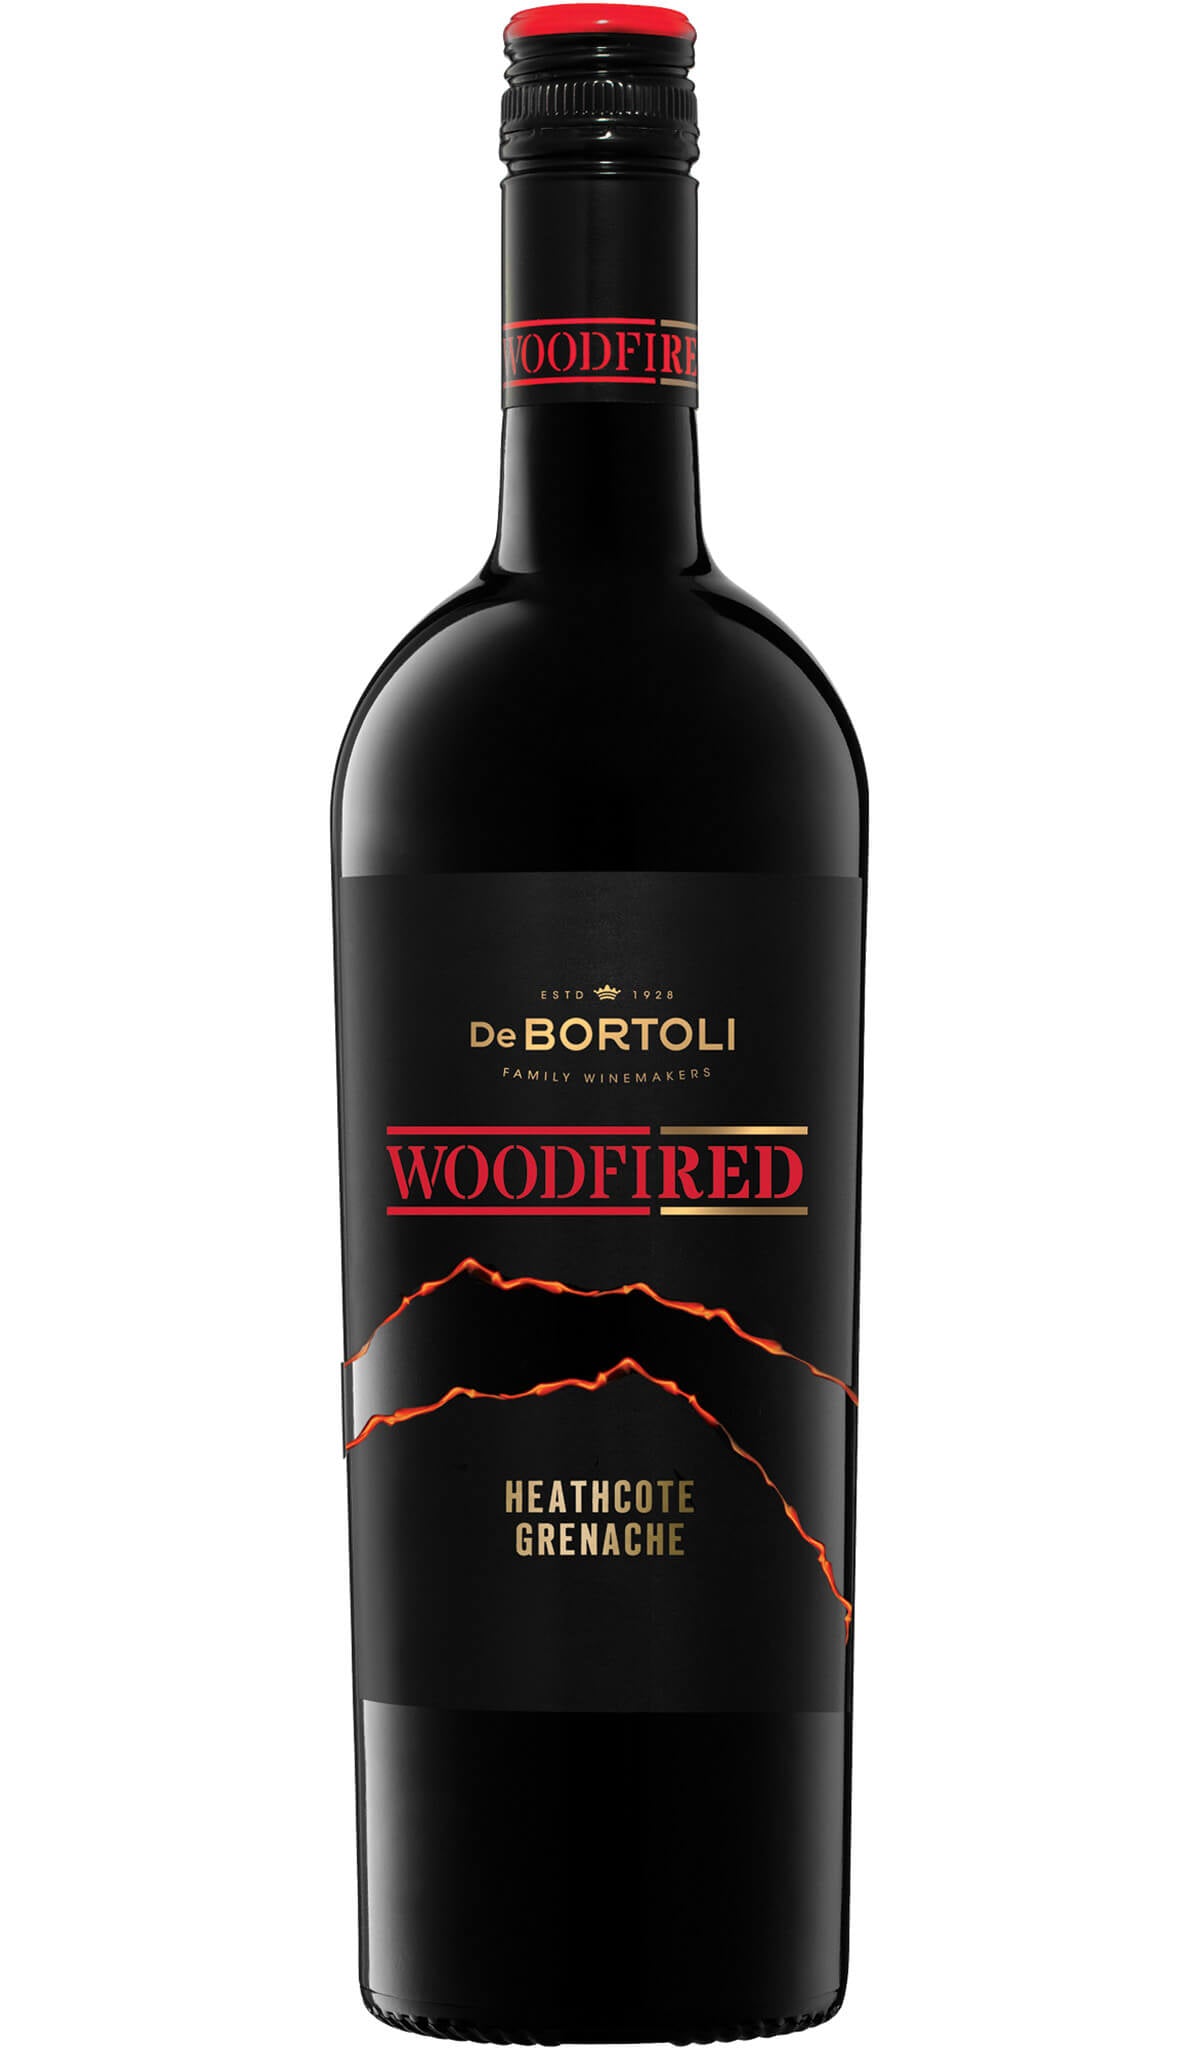 Find out more or buy De Bortoli Woodfired Heathcote Grenache 2021 available online at Wine Sellers Direct - Australia's independent liquor specialists.